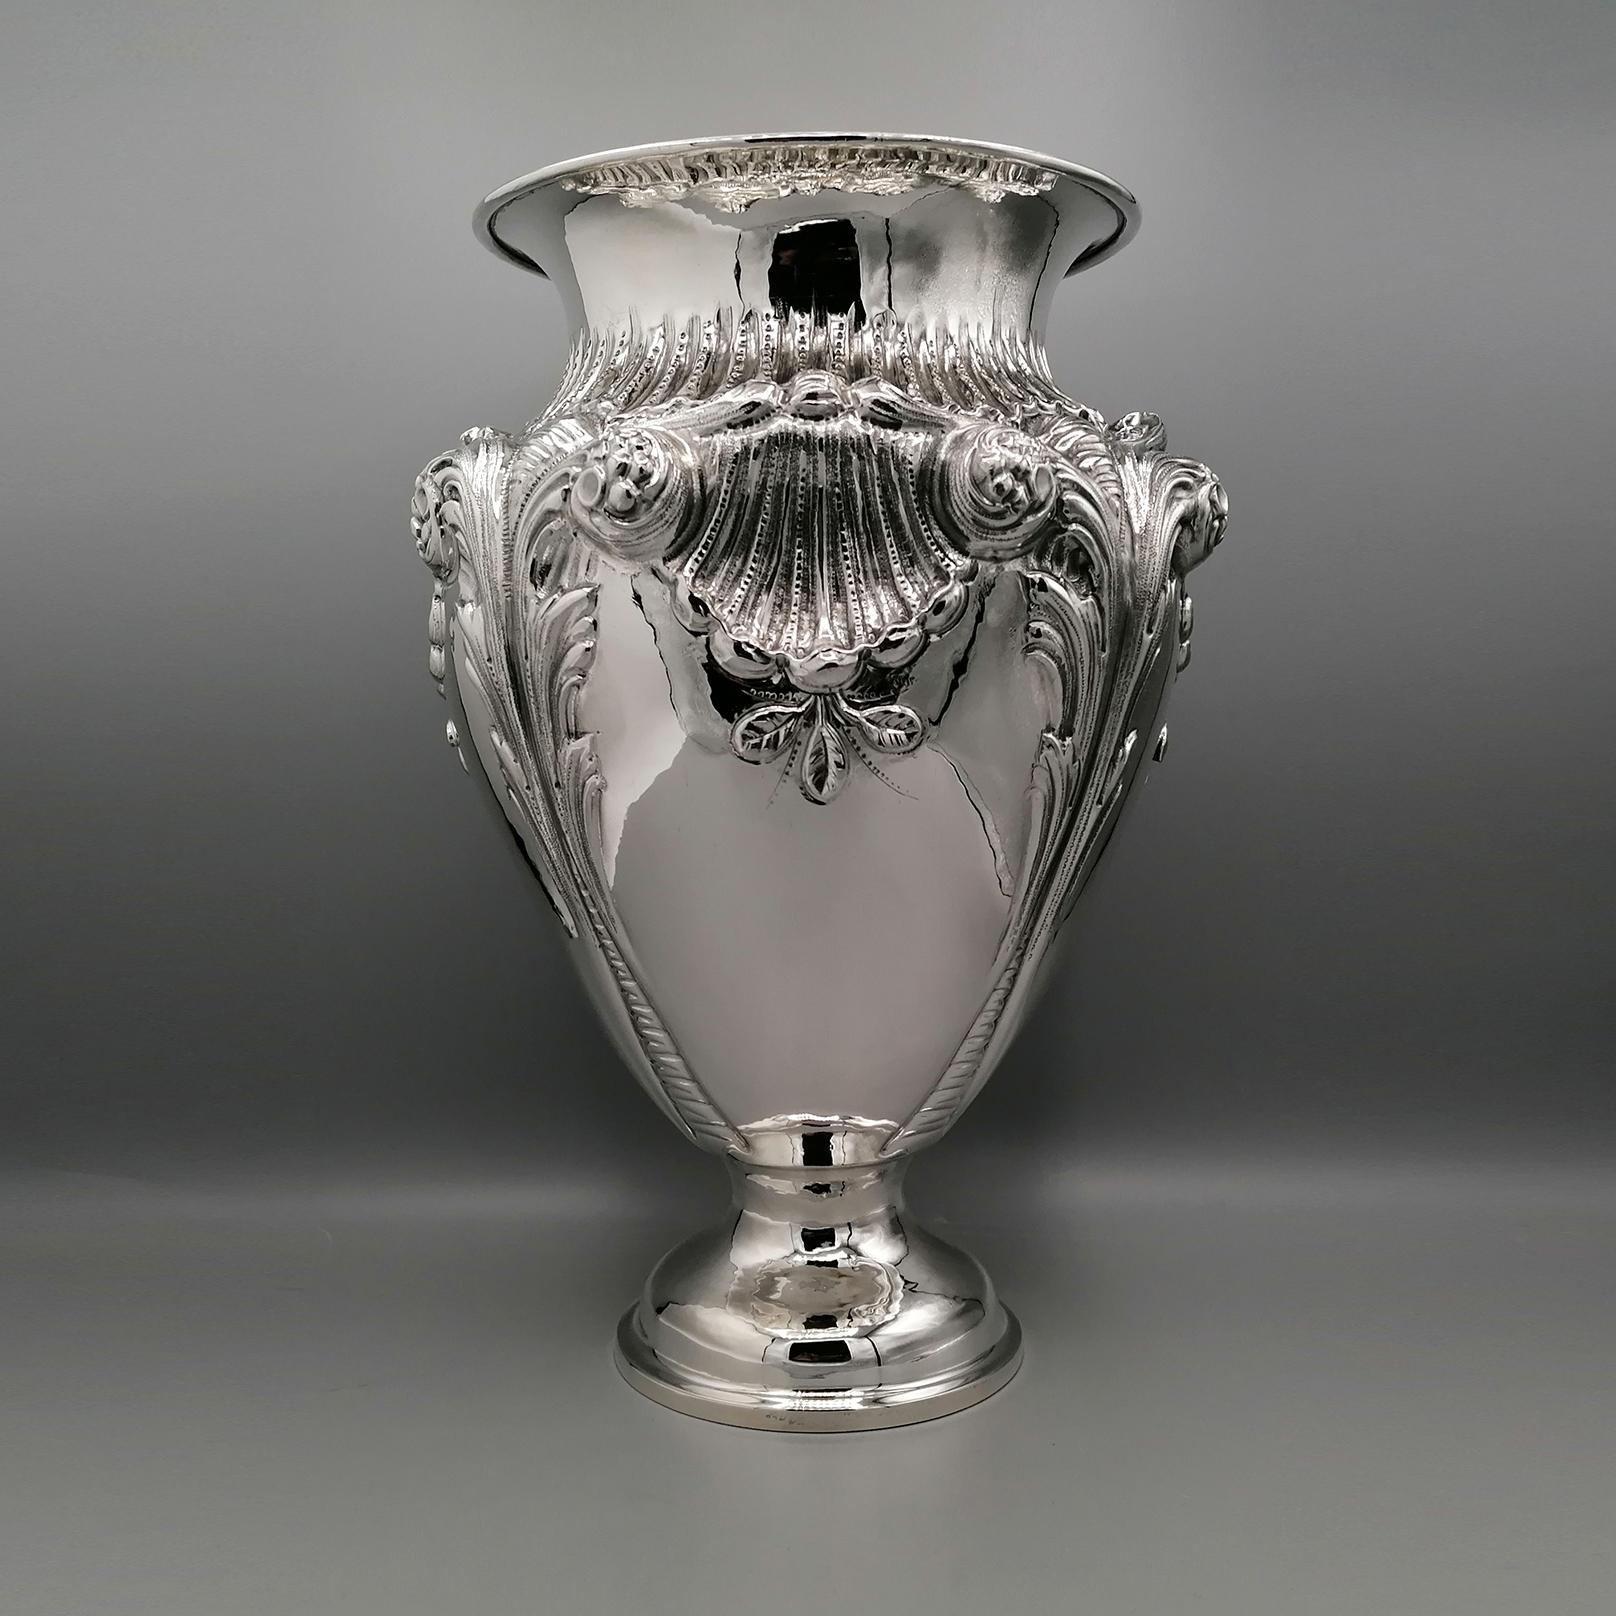 Large baroque style sterling silver vase.
The body of the vase has been masterfully embossed with shells, flowers and volutes, typical of the Baroque style.
Still in the body of the vase, some parts have been left shiny to highlight the great